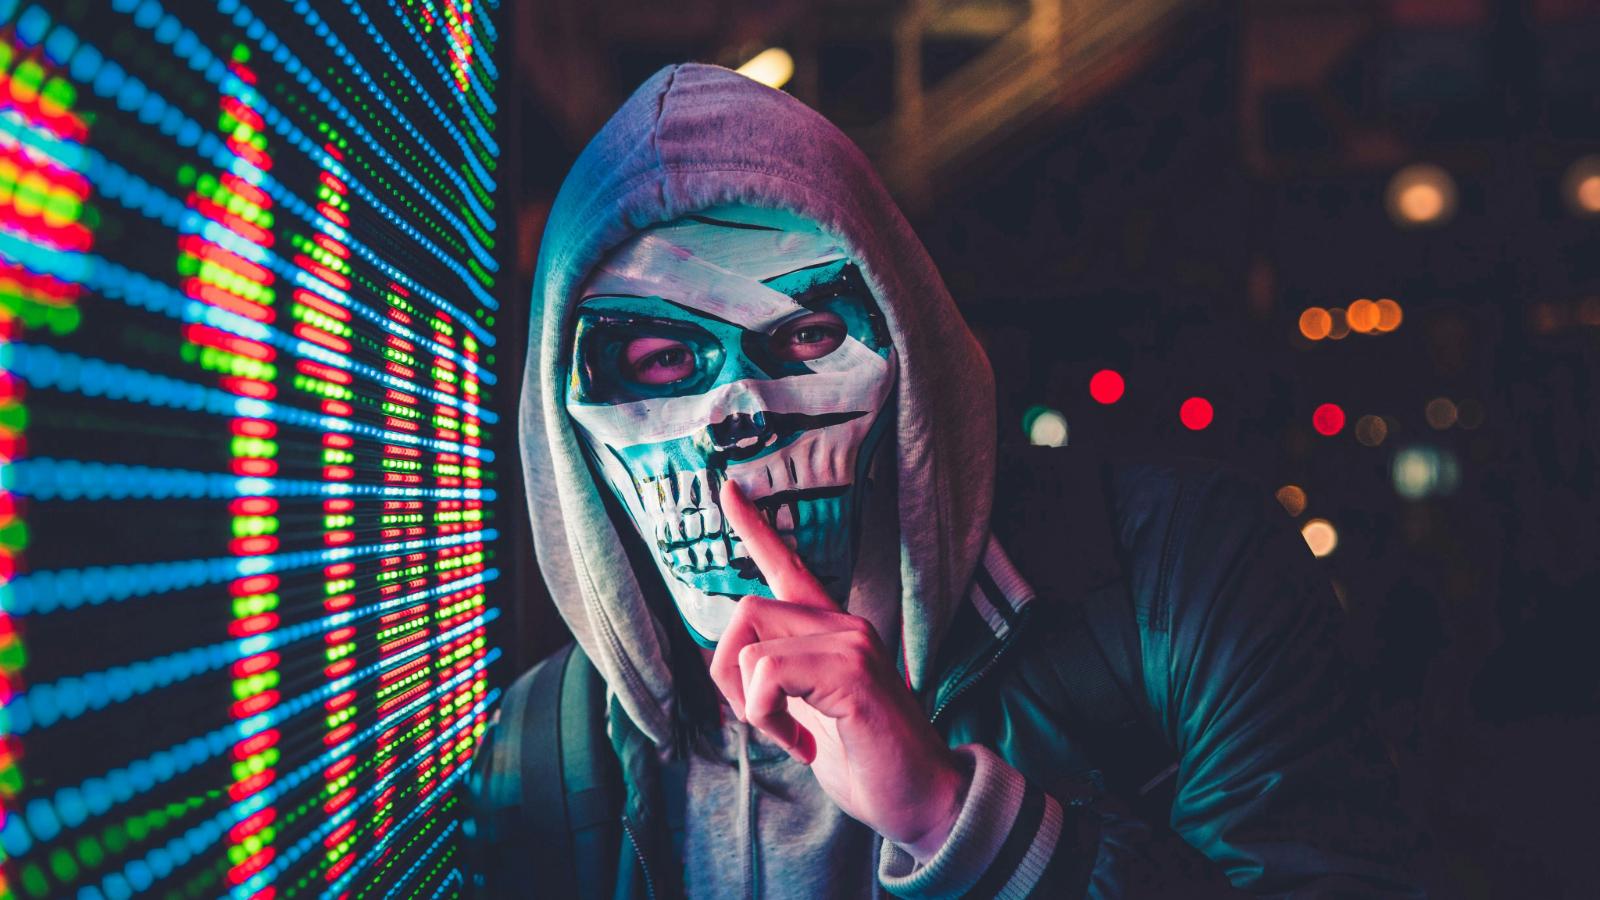 Image of a person wearing a mask, next to cryptic background.